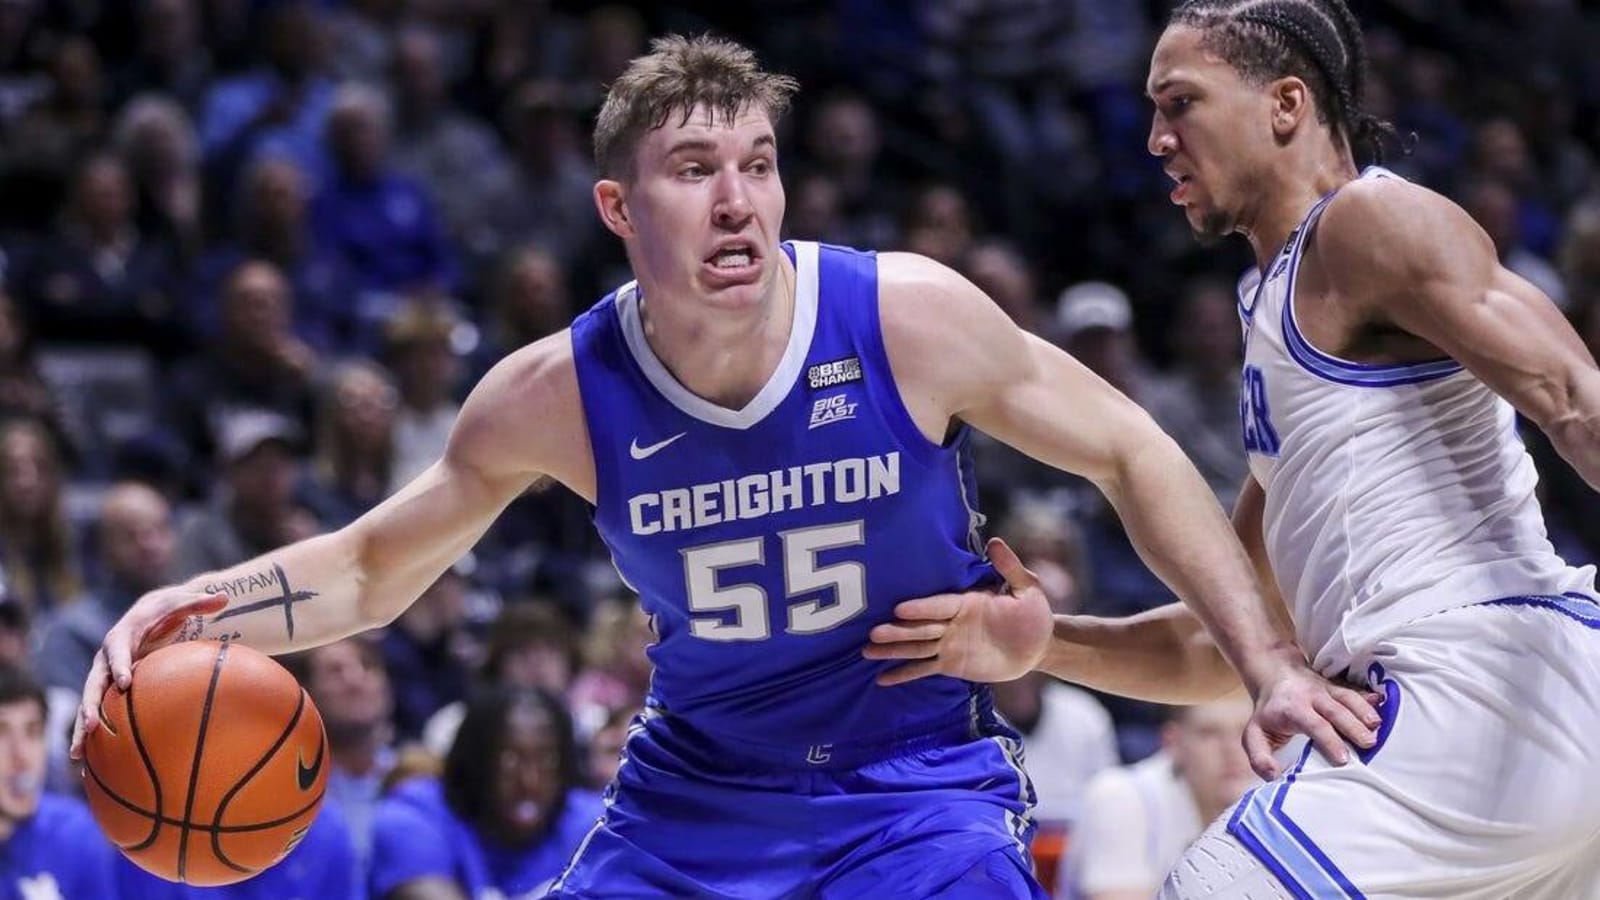 No. 19 Creighton gets back on track with win over Xavier